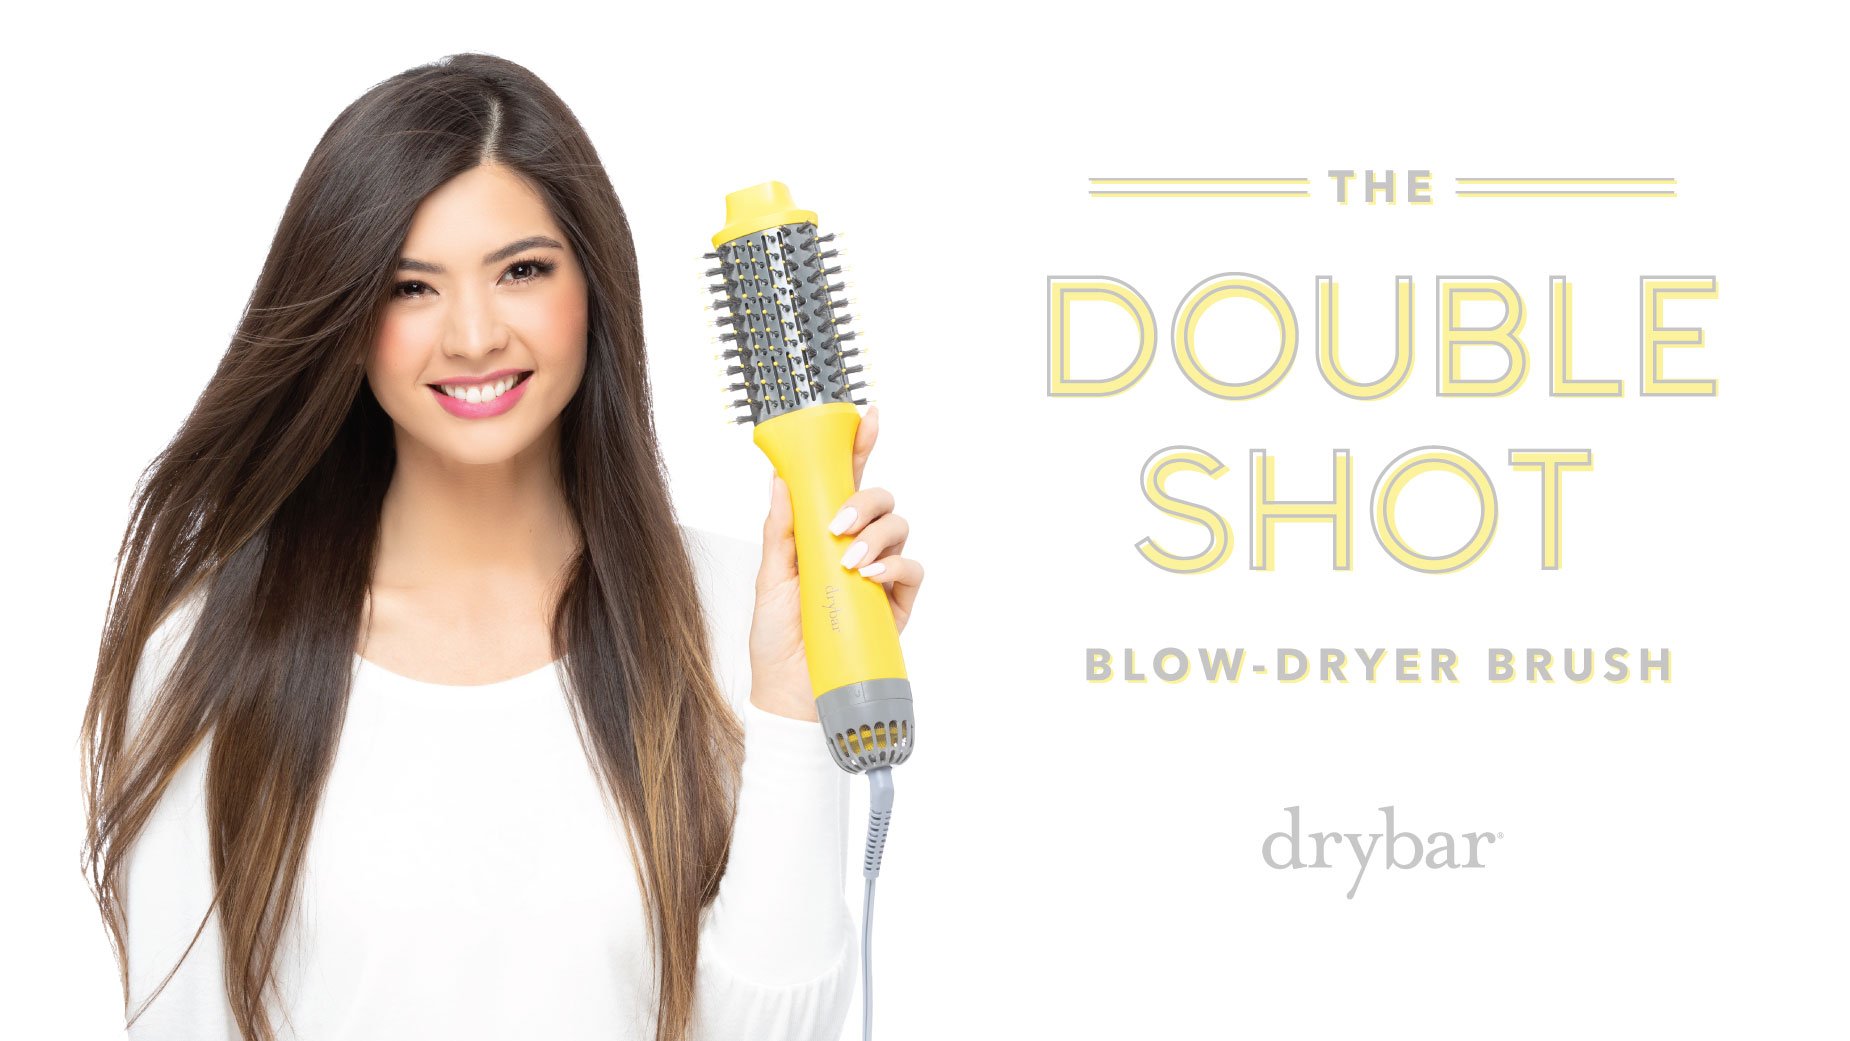 The Double Shot Oval Blow-Dryer Brush Video